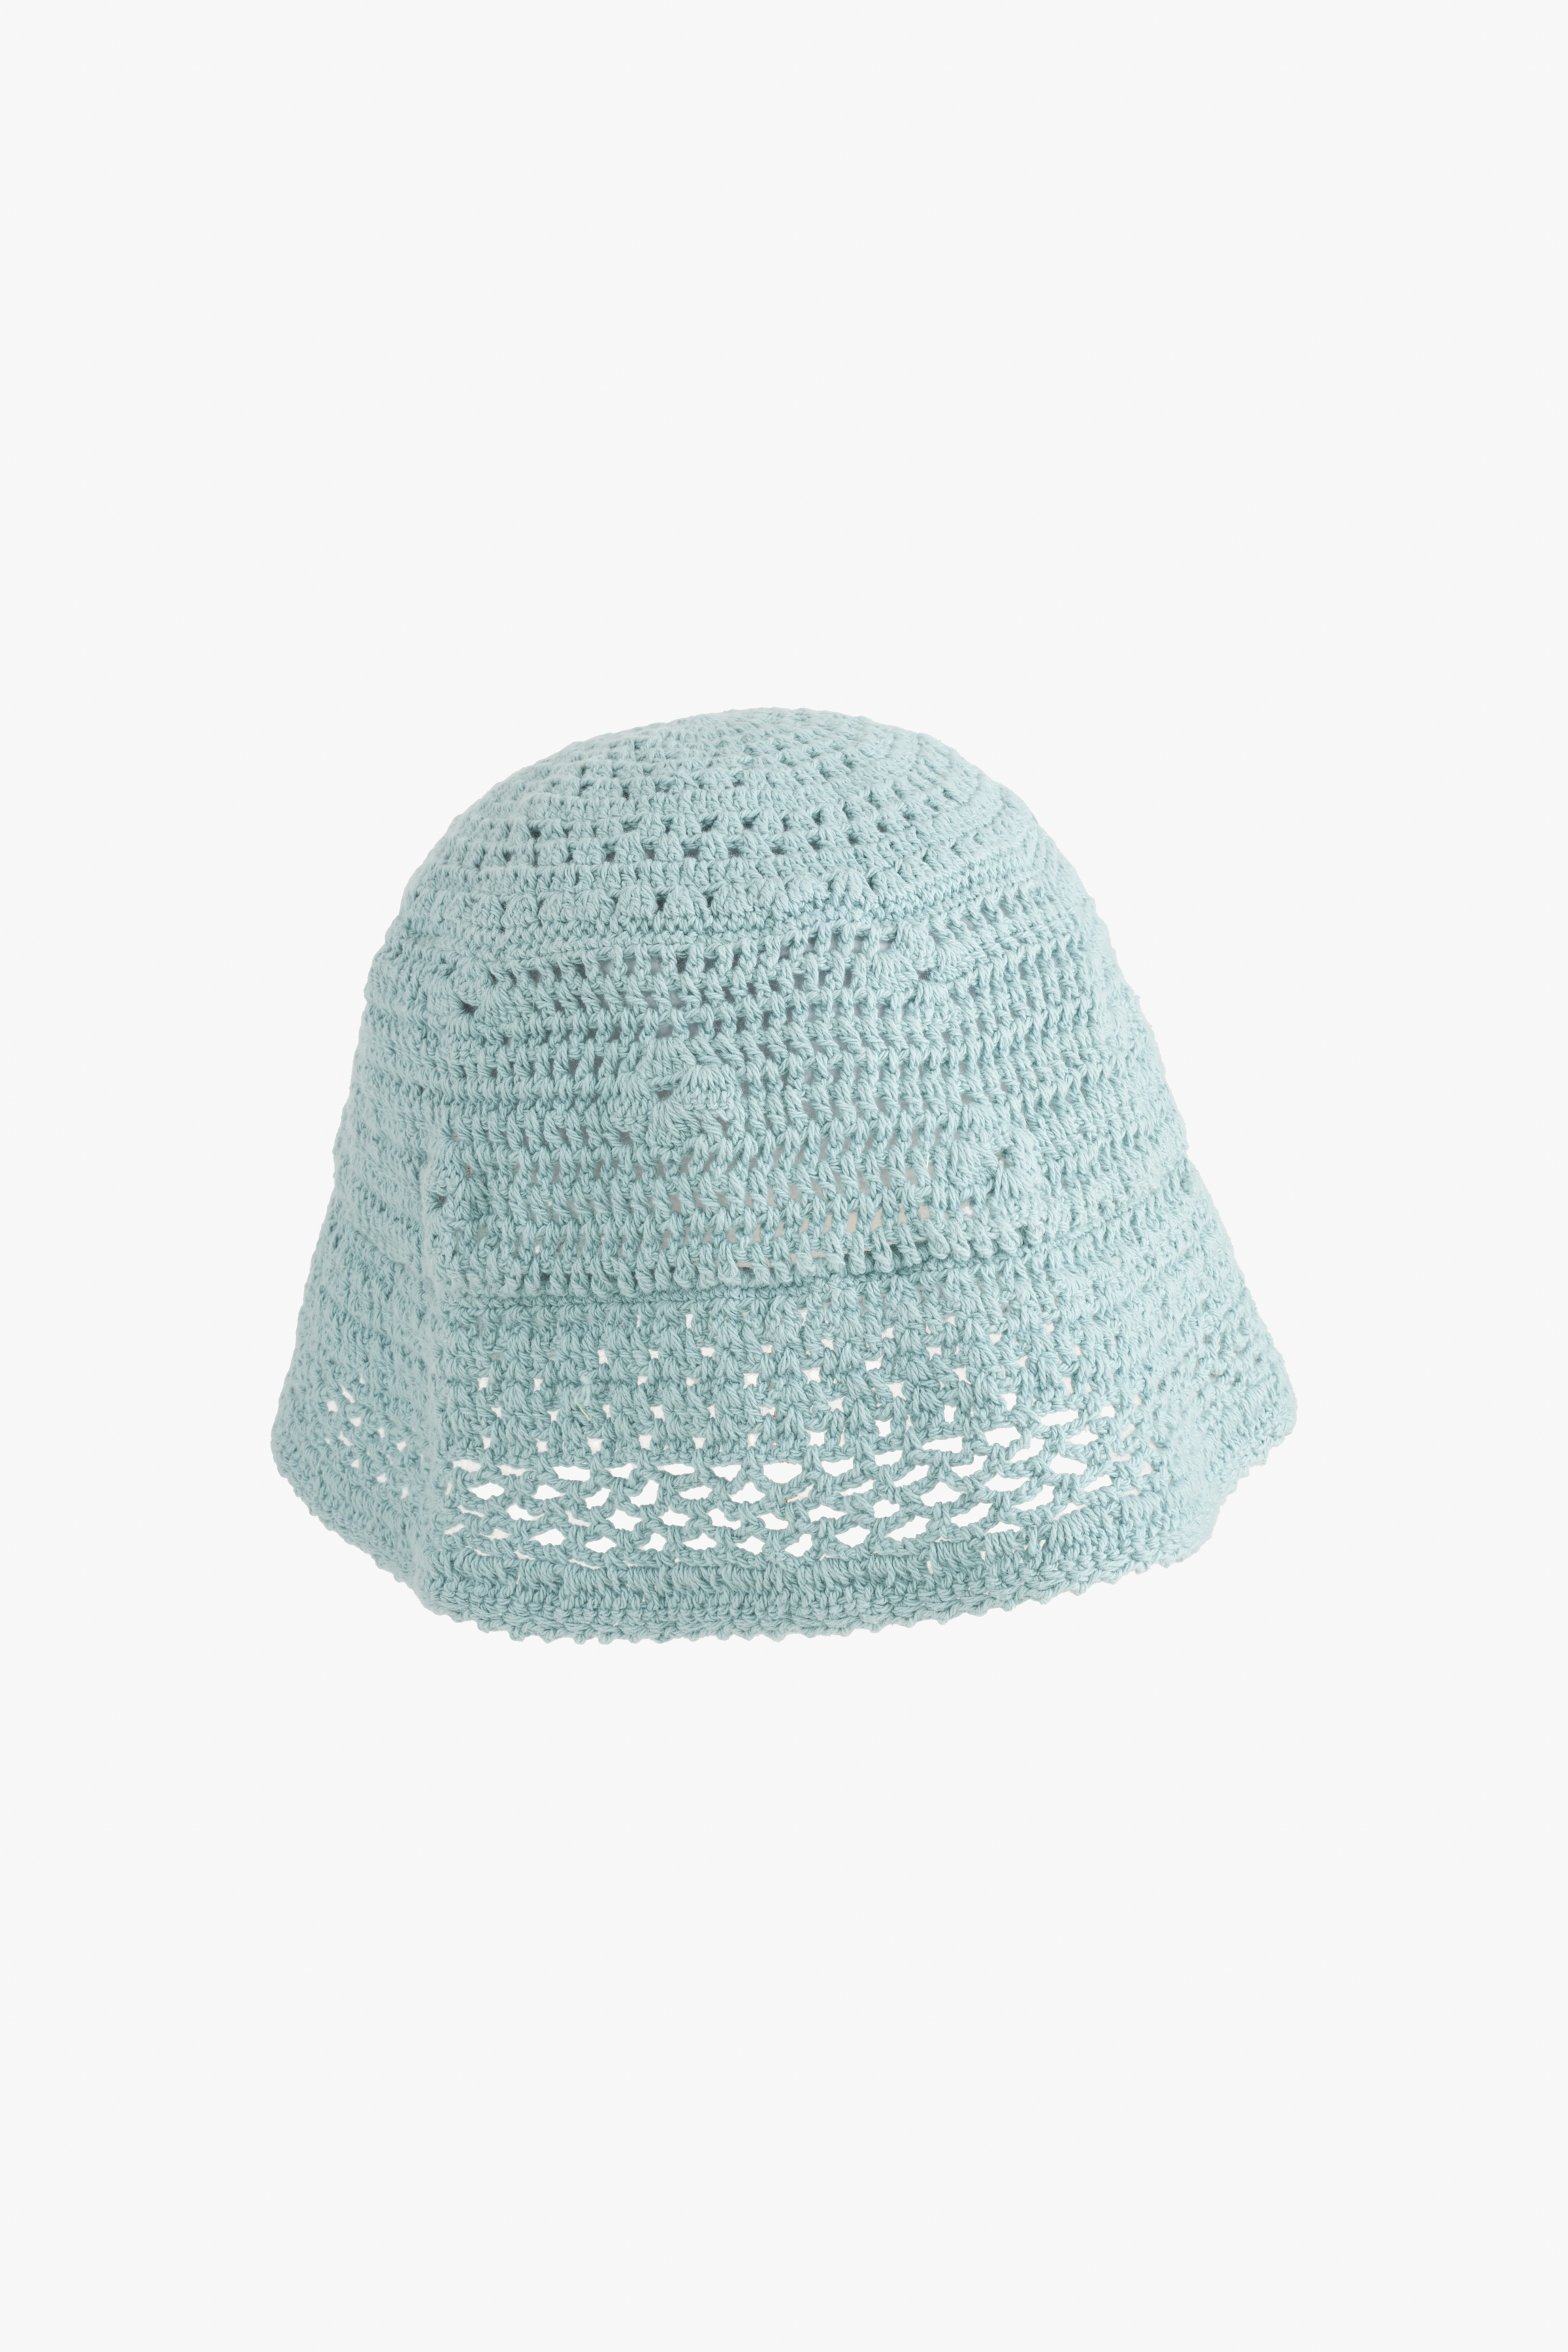 CROCHET KNIT HAT LIMITED EDITION